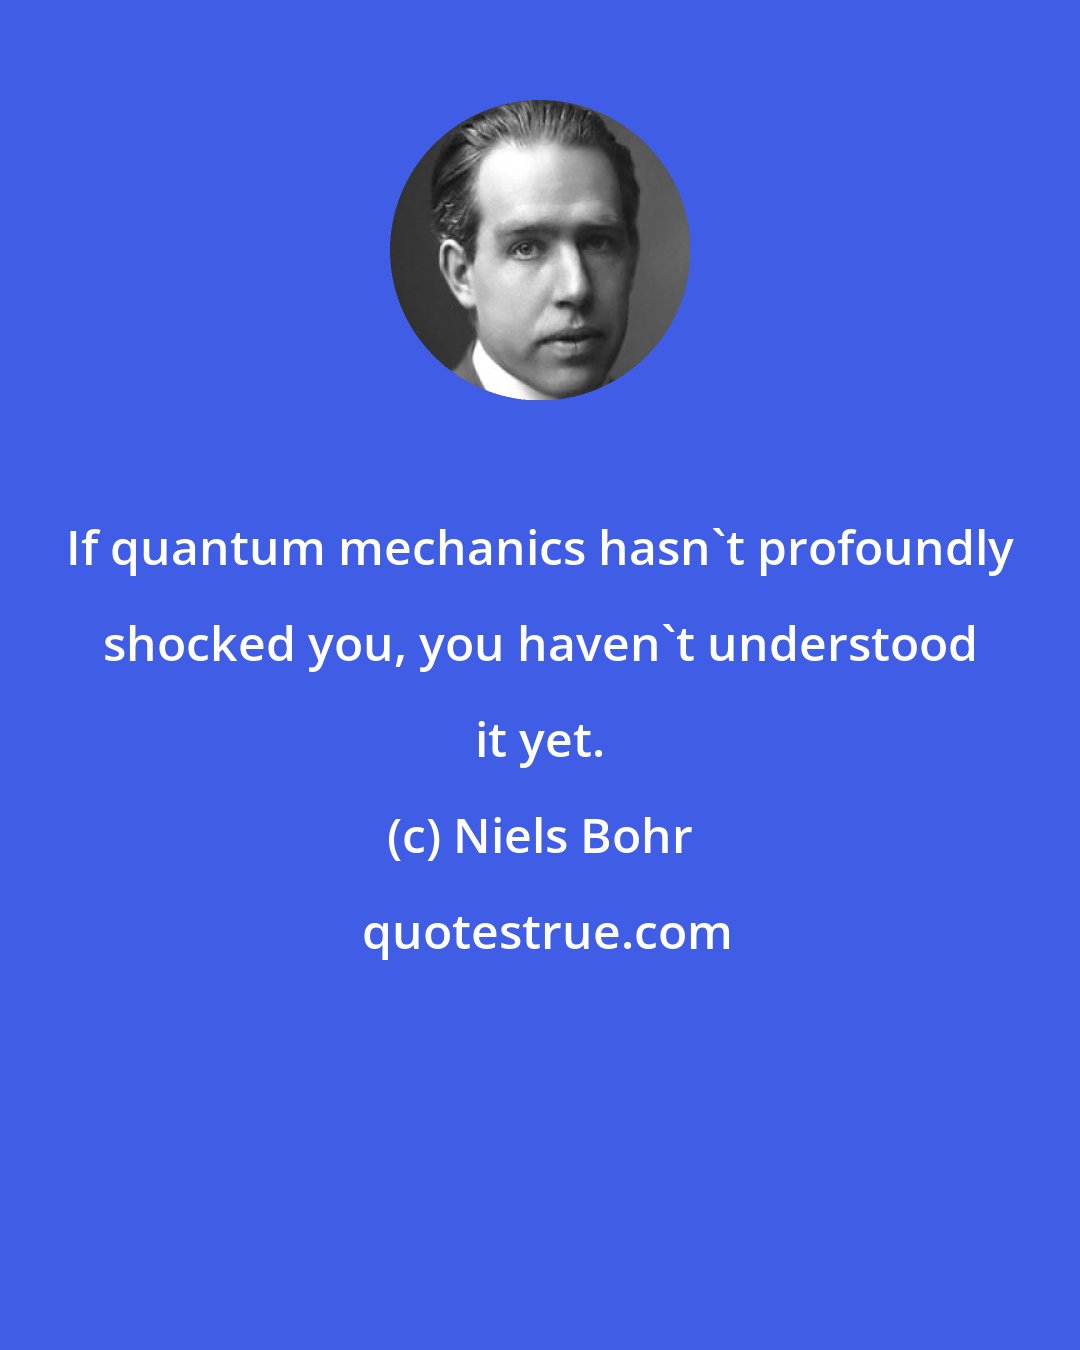 Niels Bohr: If quantum mechanics hasn't profoundly shocked you, you haven't understood it yet.